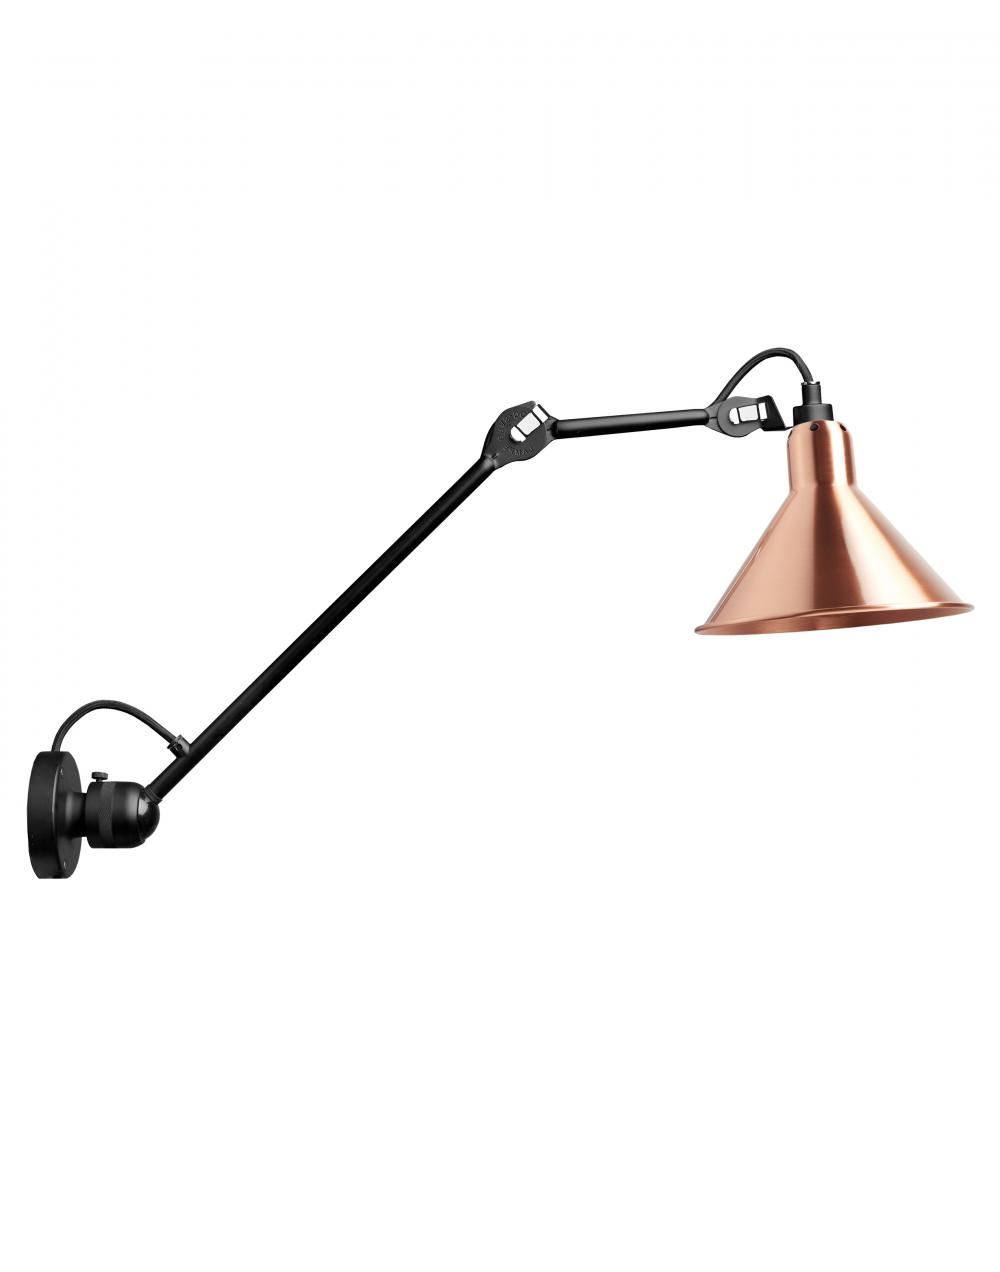 Lampe Gras 304 Medium Wall Light Copper Shade With White Interior Conic Shade